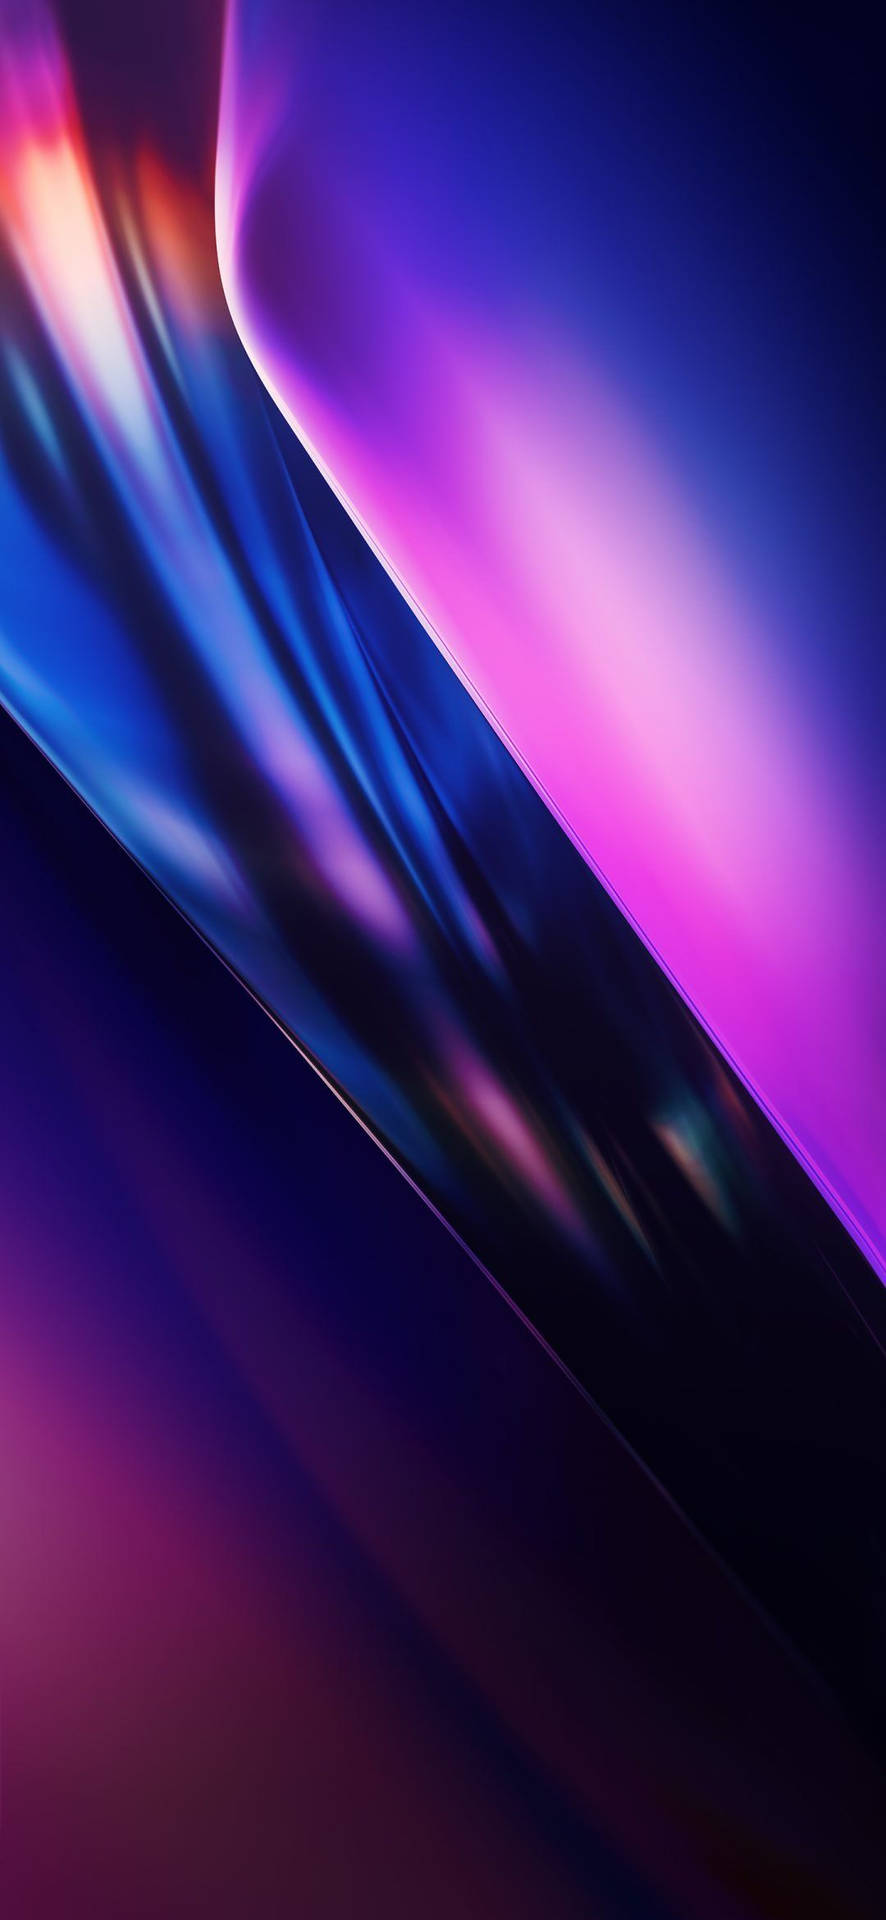 Samsung Mobile Iridescent Abstract Waves Wallpaper